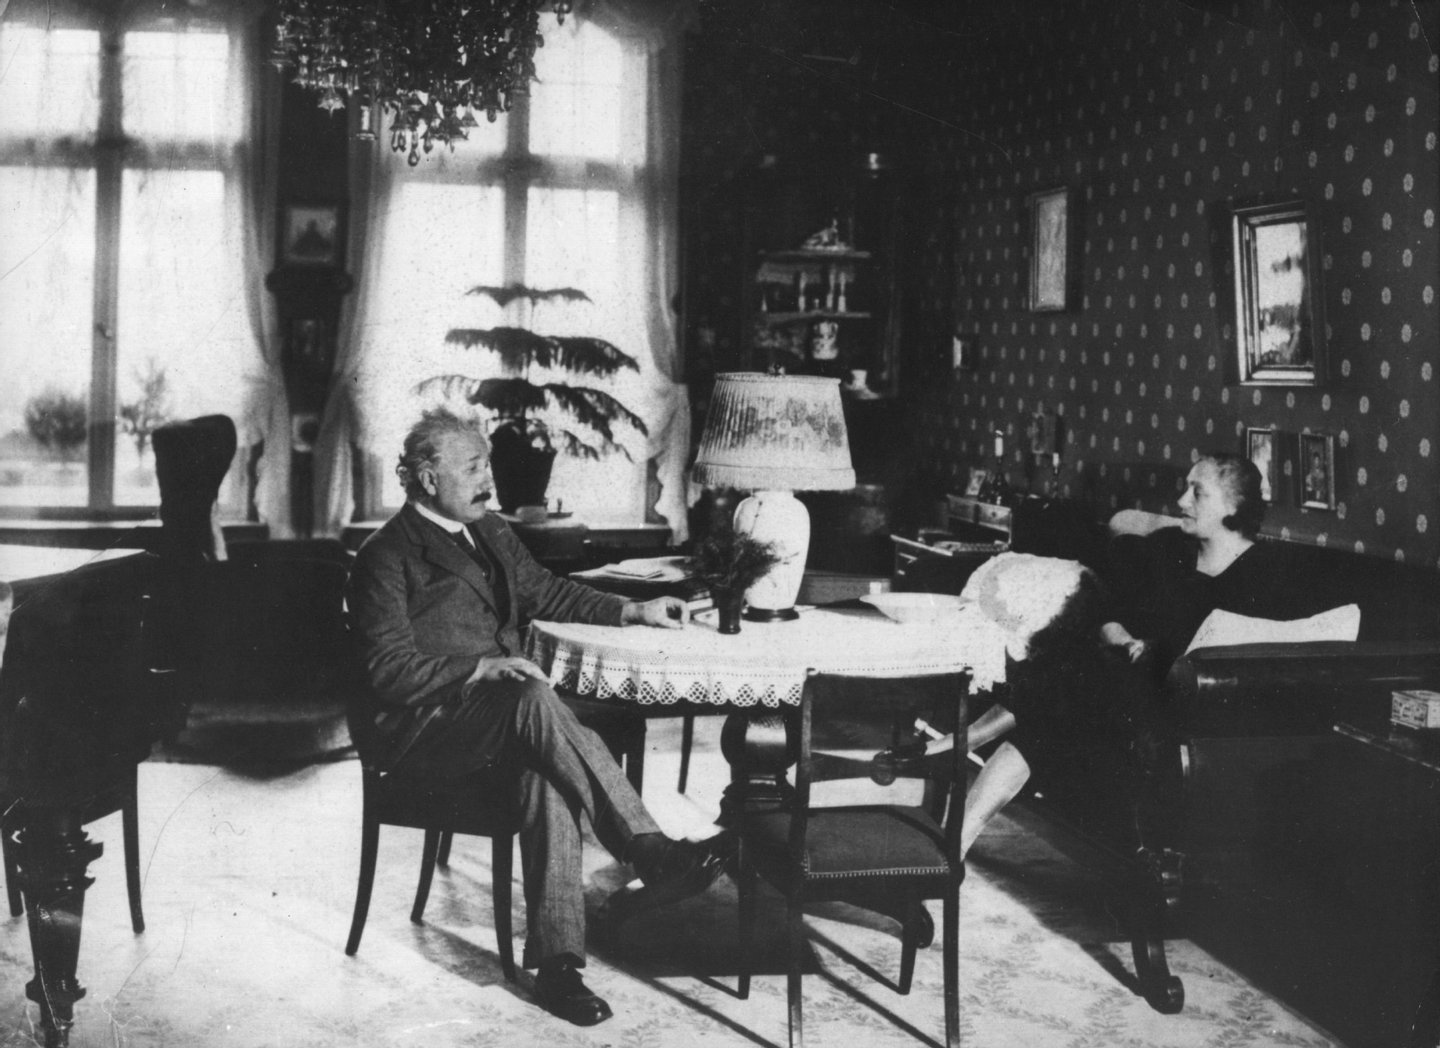 circa 1930: German-Swiss-American mathematical physicist Albert Einstein (1879 - 1955) and his wife Elsa at home near Berlin. (Photo by Keystone/Getty Images)